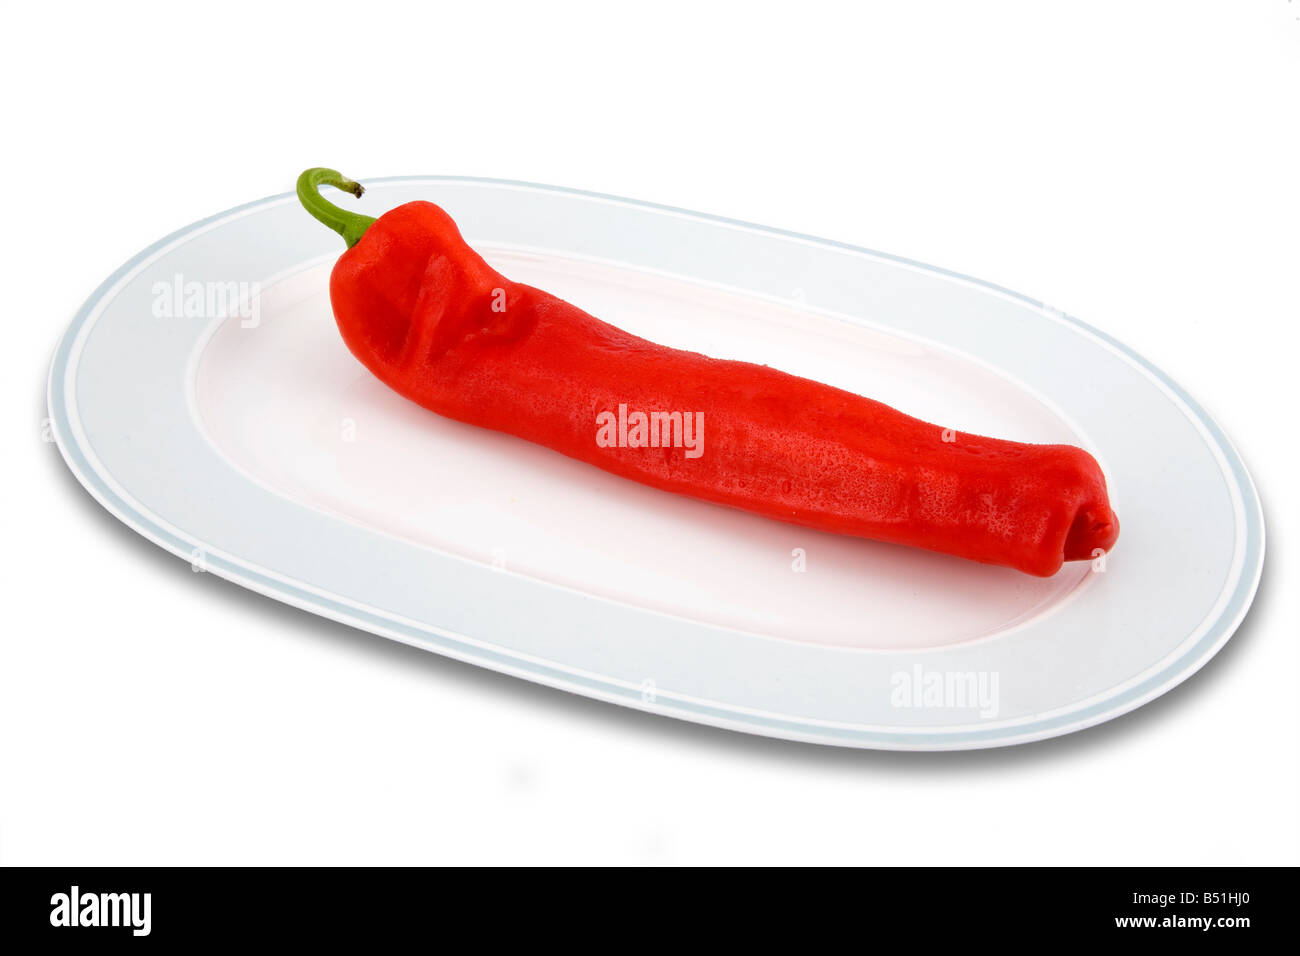 Red Chili peppers Stock Photo